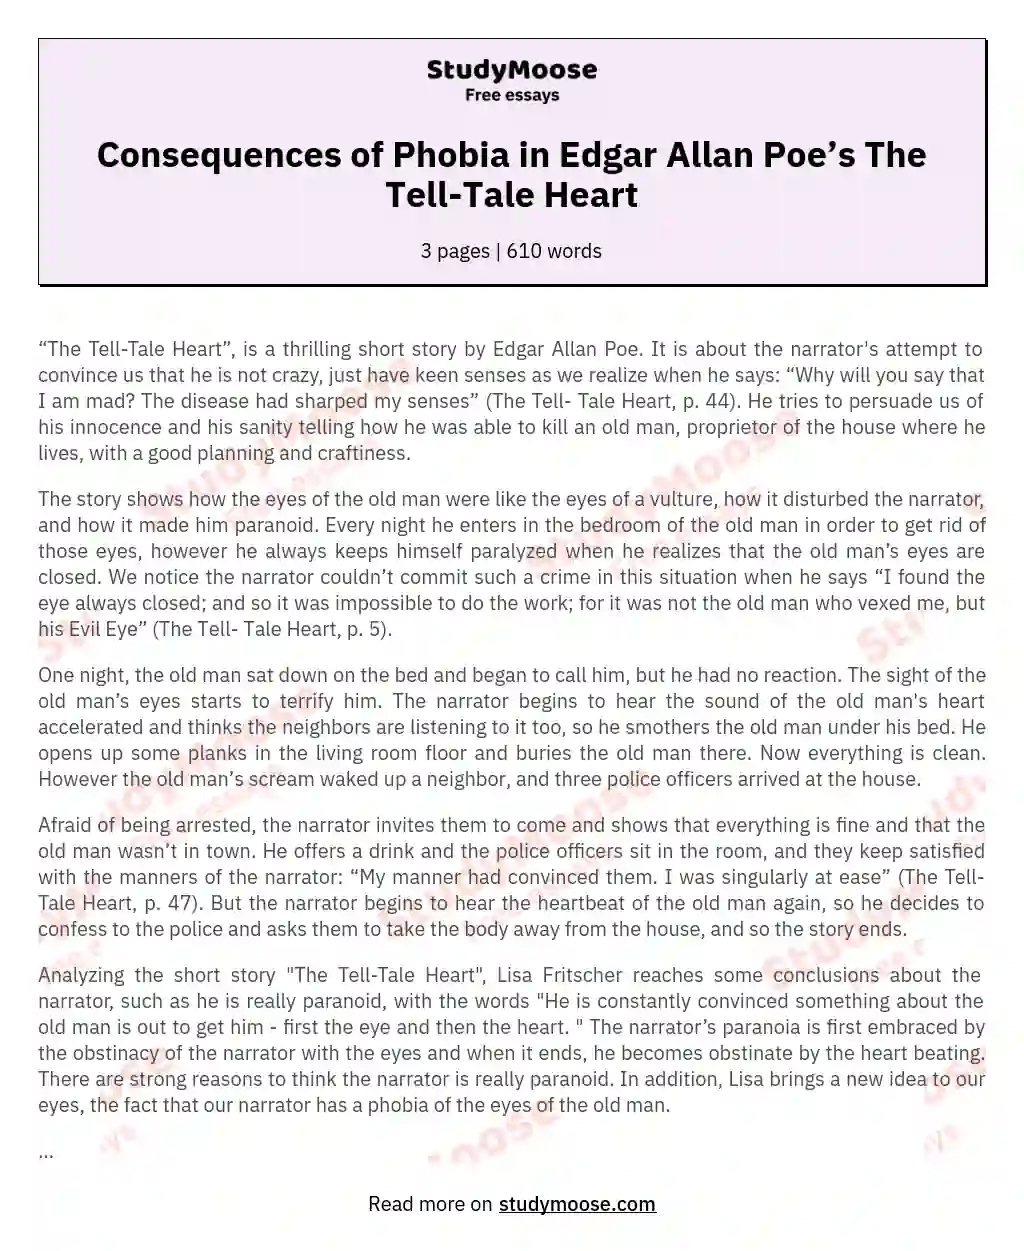 Consequences of Phobia in Edgar Allan Poe’s The Tell-Tale Heart